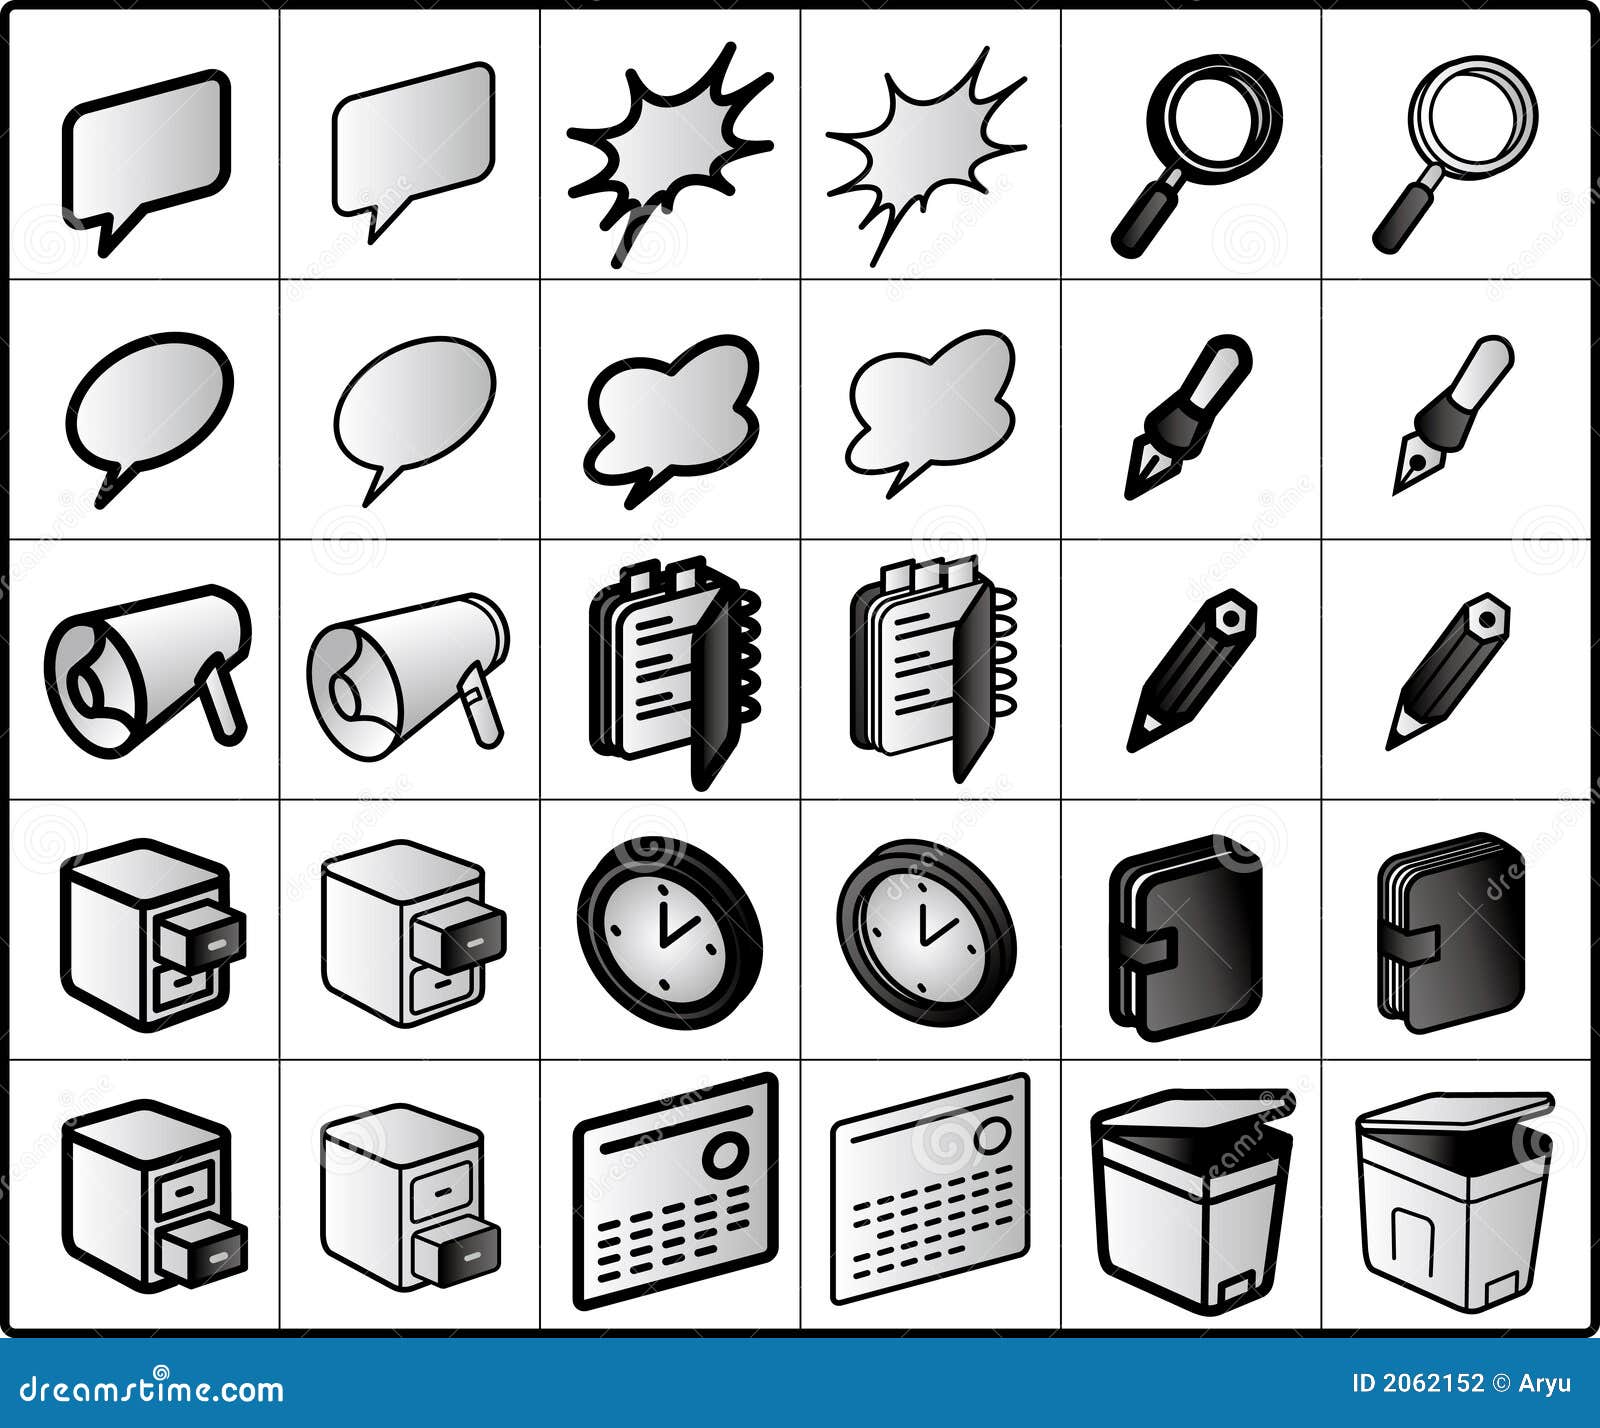 group-ware icons